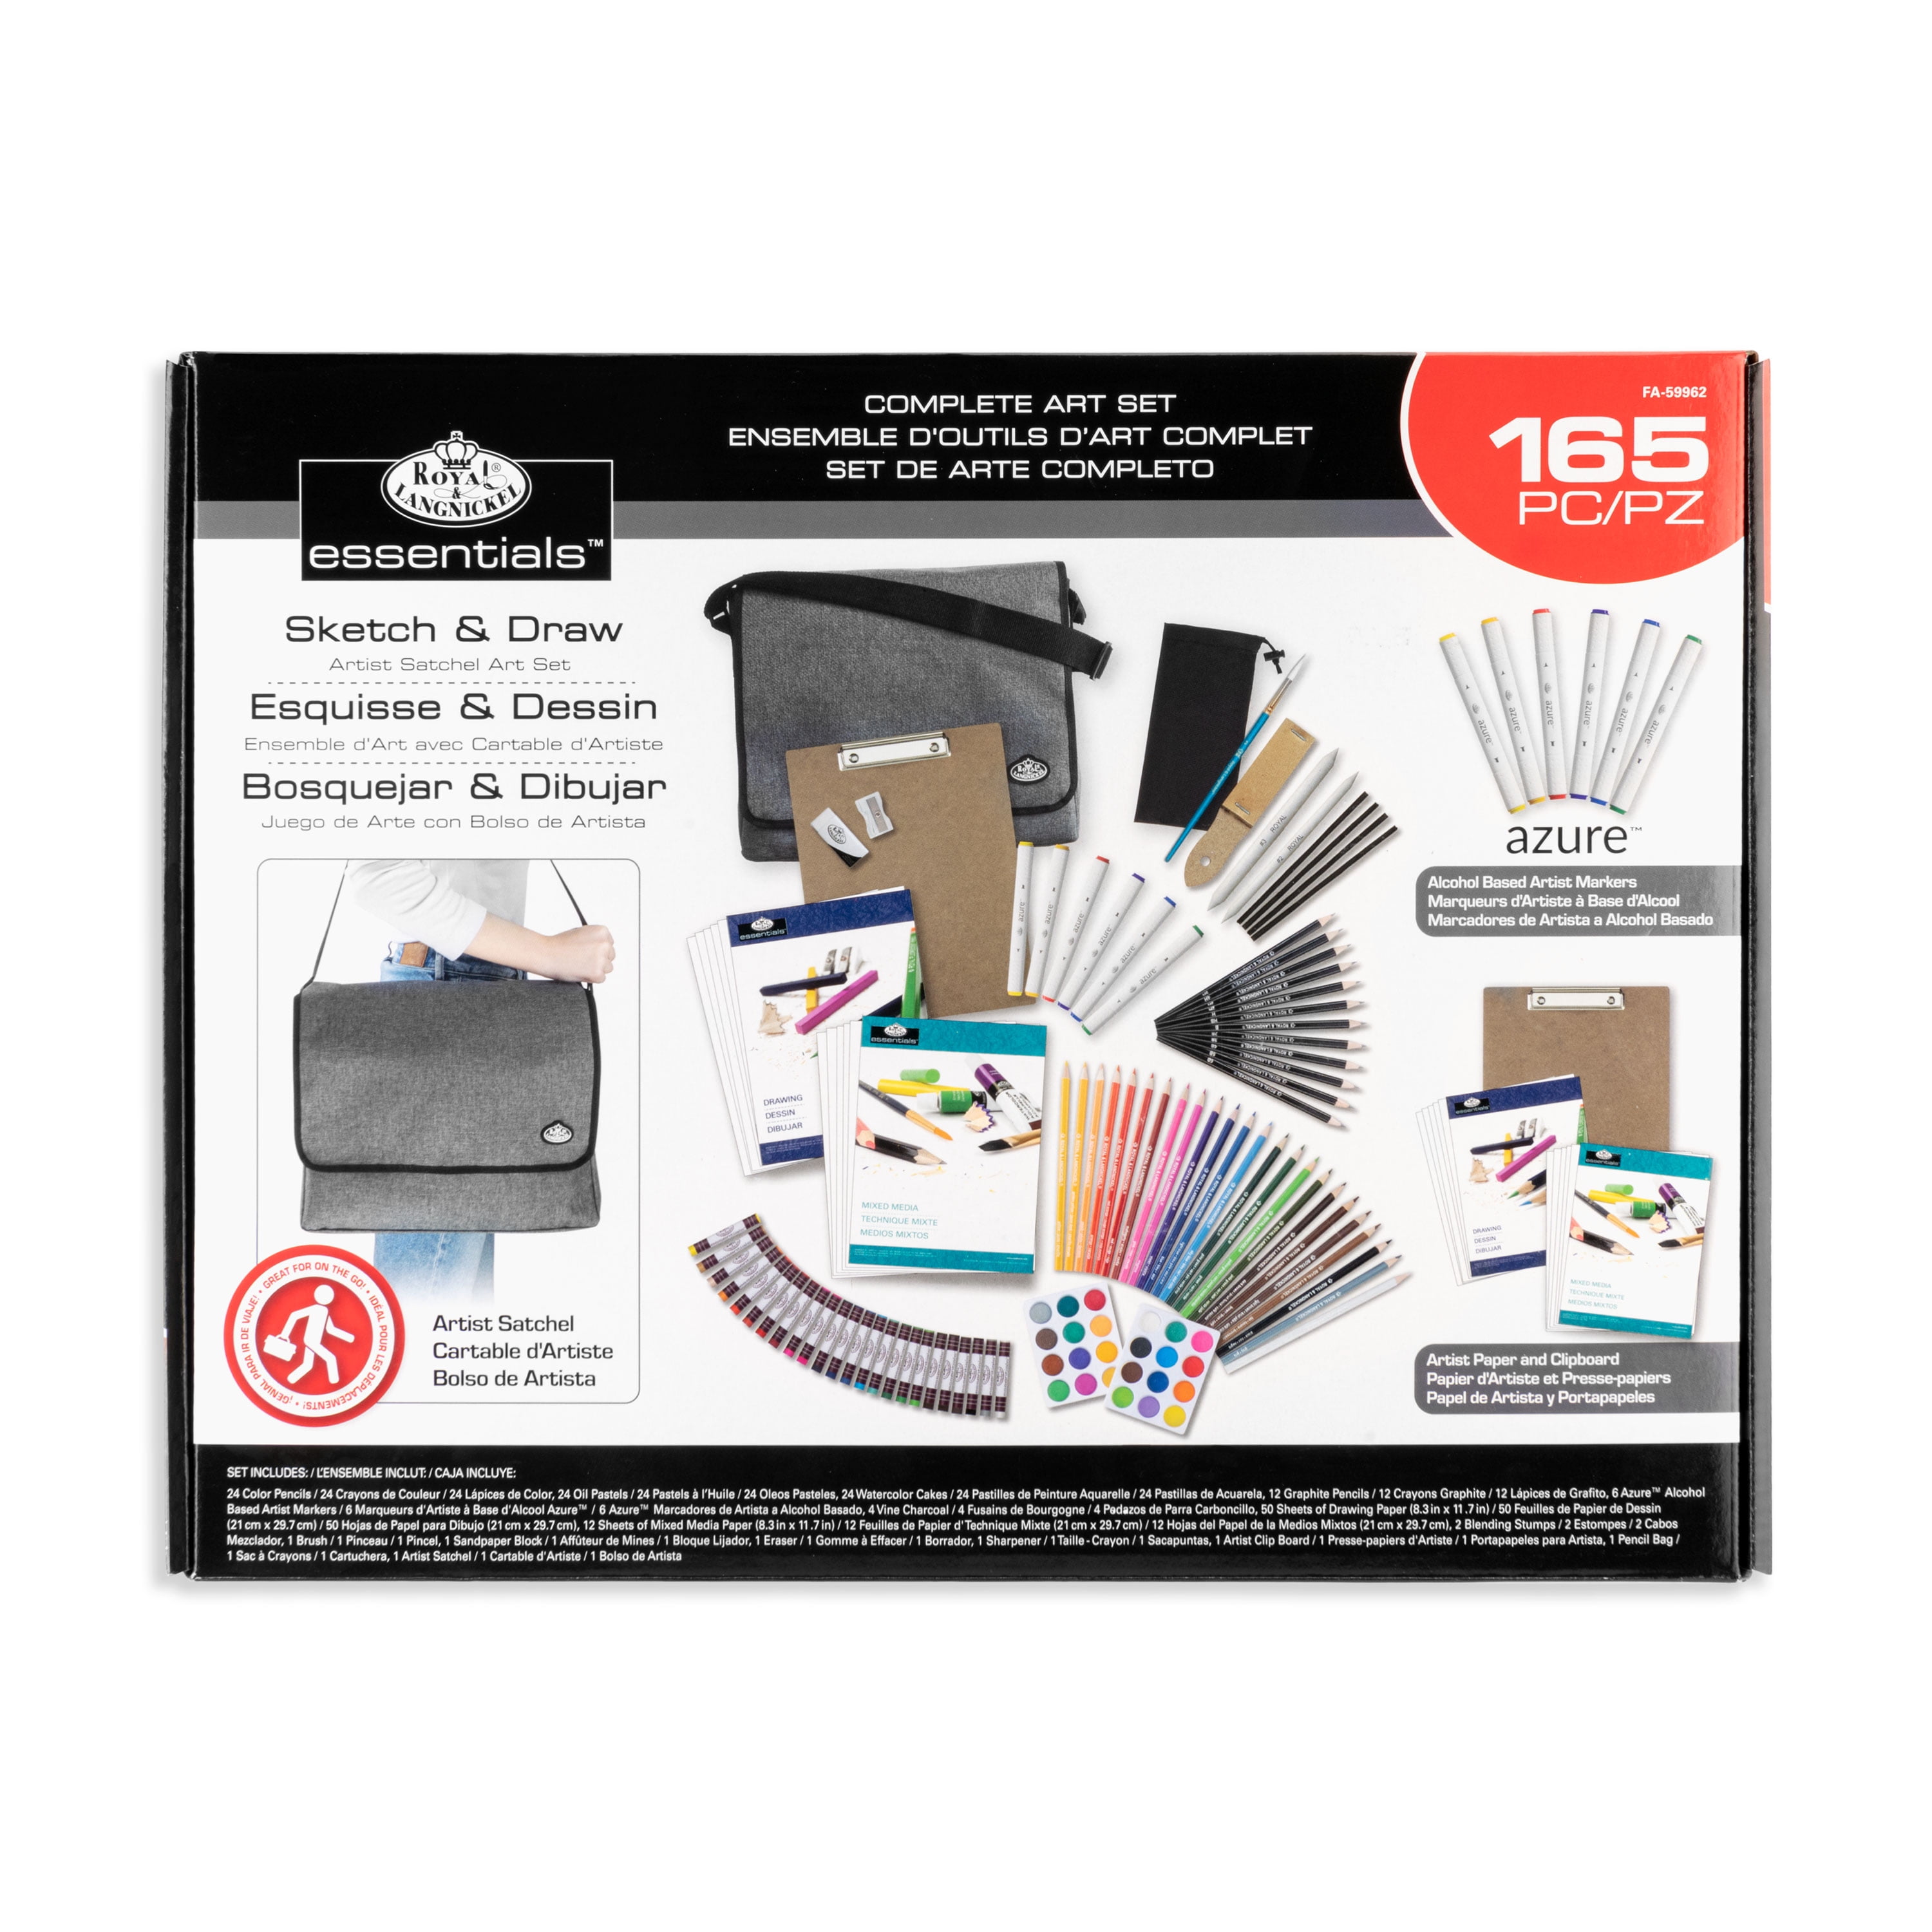 Royal & Langnickel Essentials - 165pc Sketch & Draw Art Set with Travel Bag for All Ages